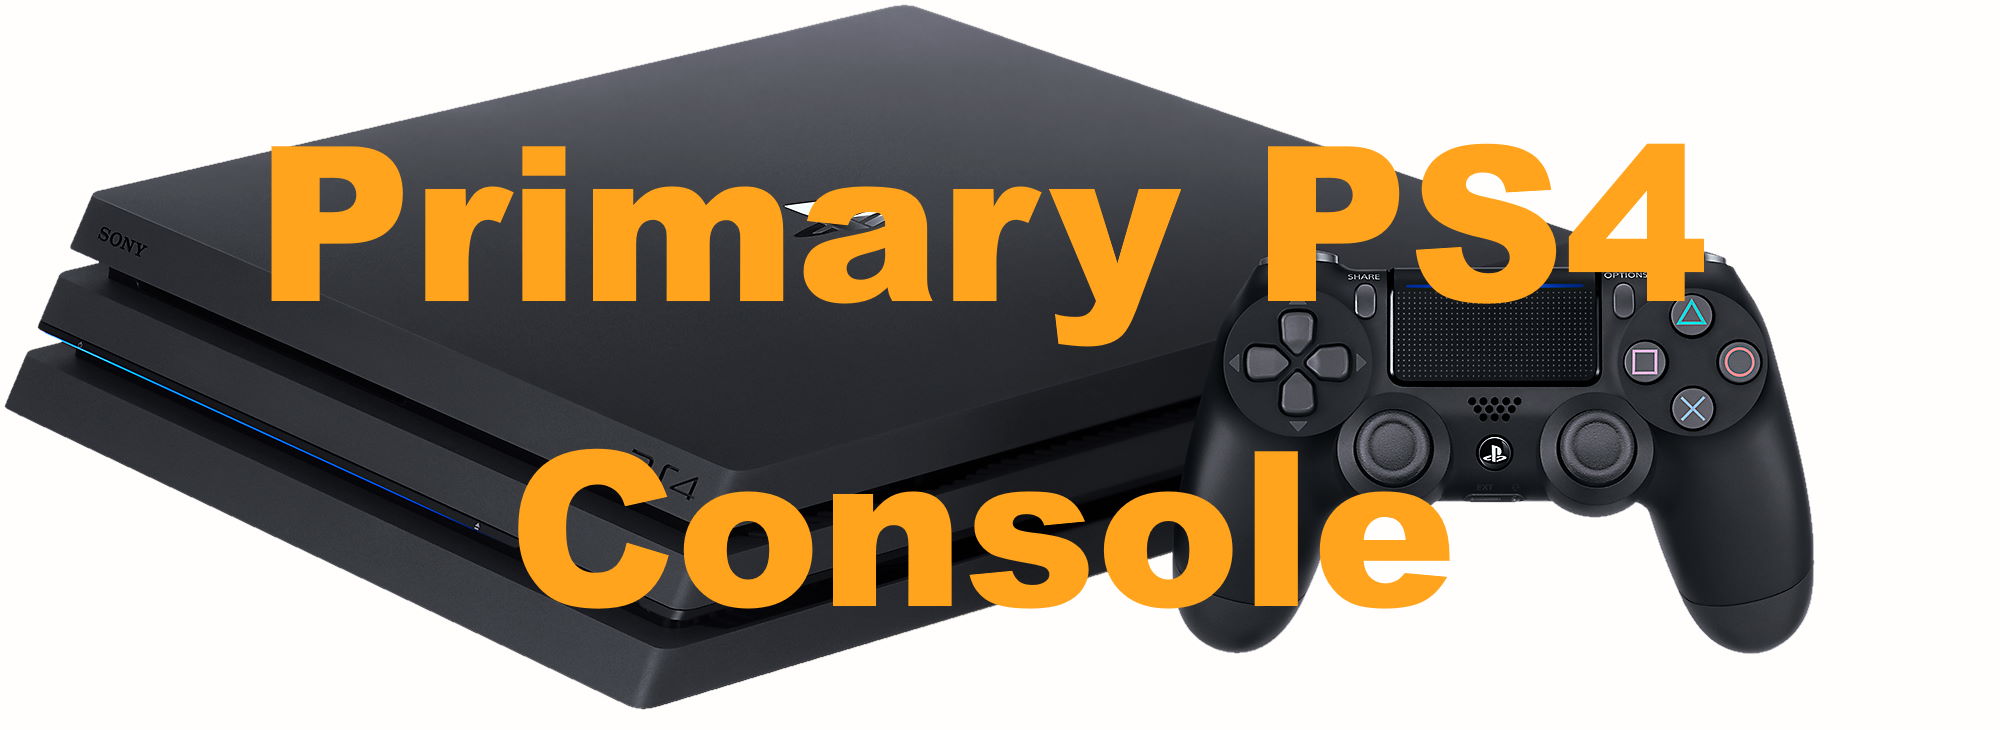 how to set a ps4 account as primary